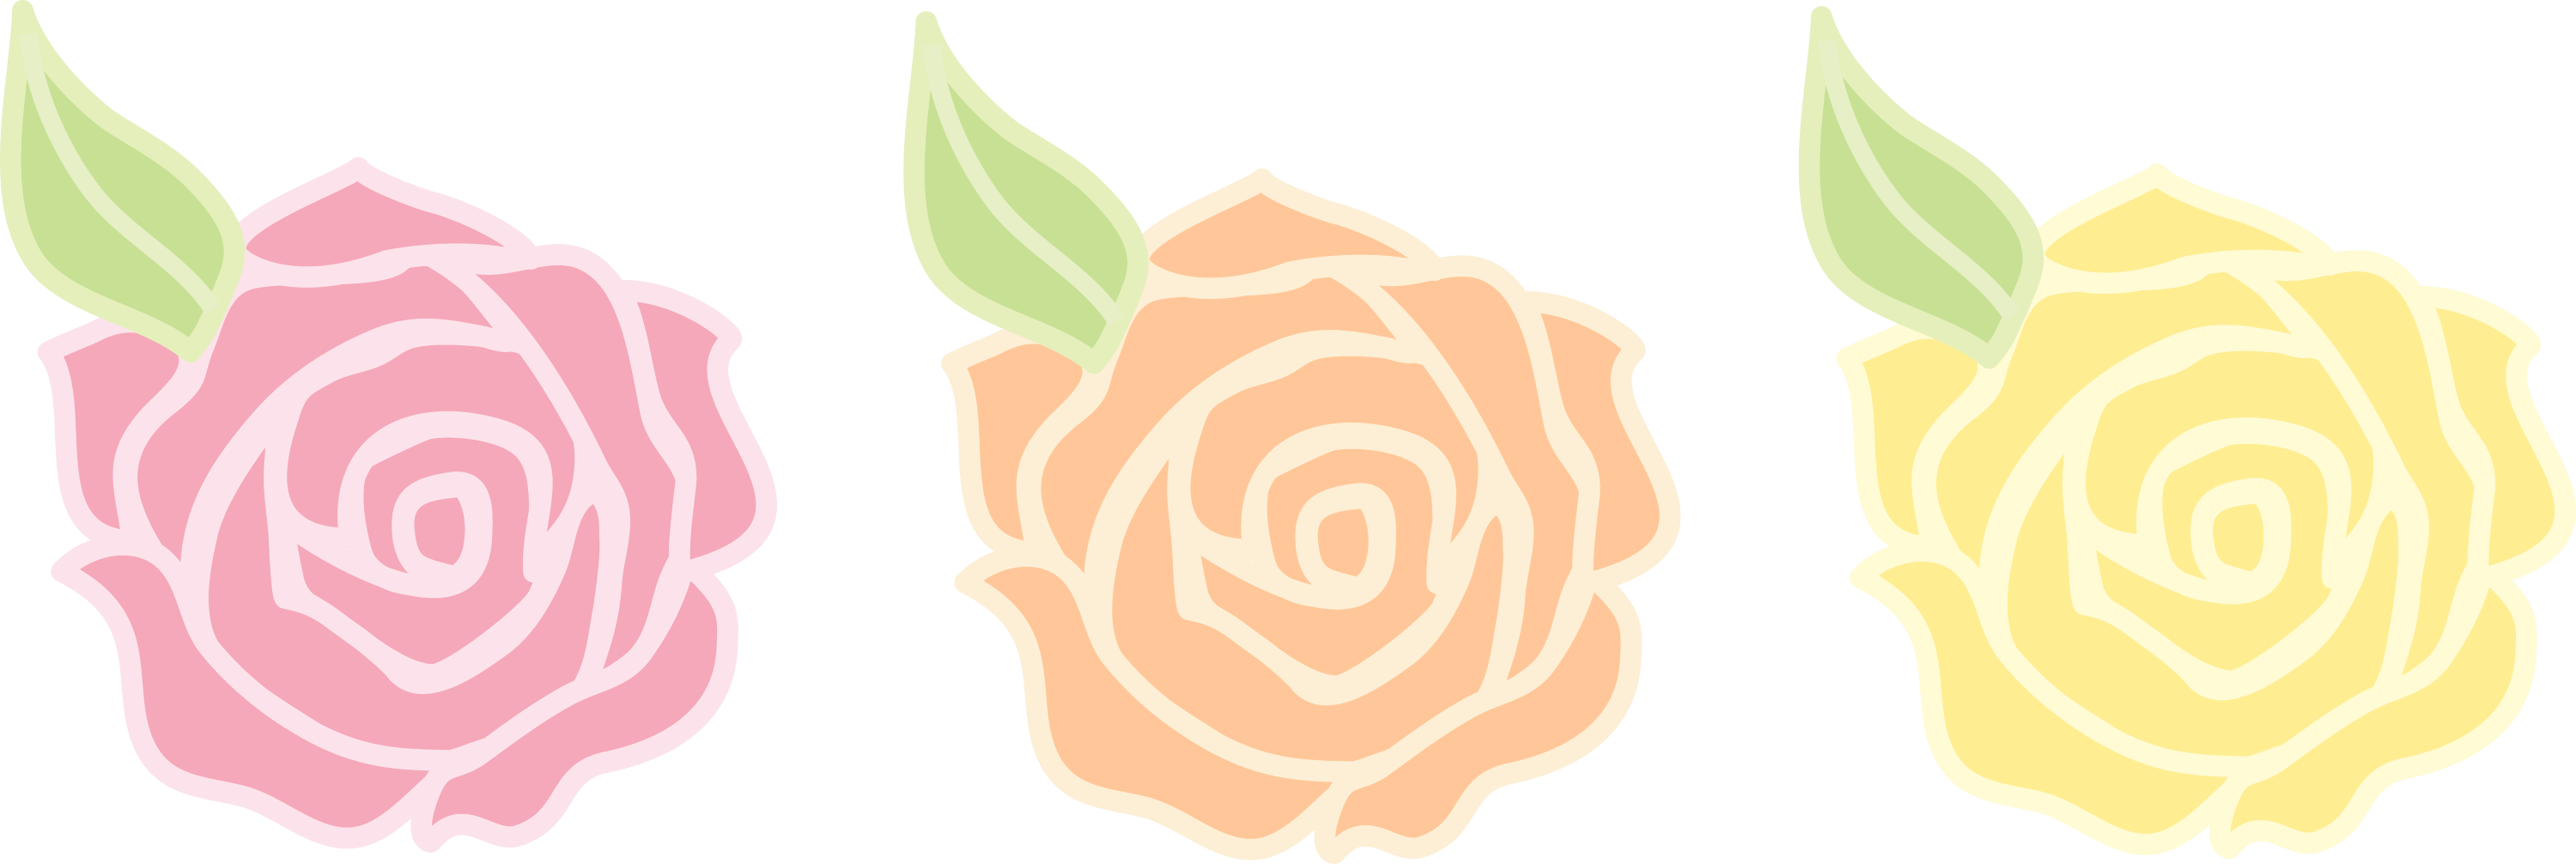 yellow roses pictures clip art - photo #25